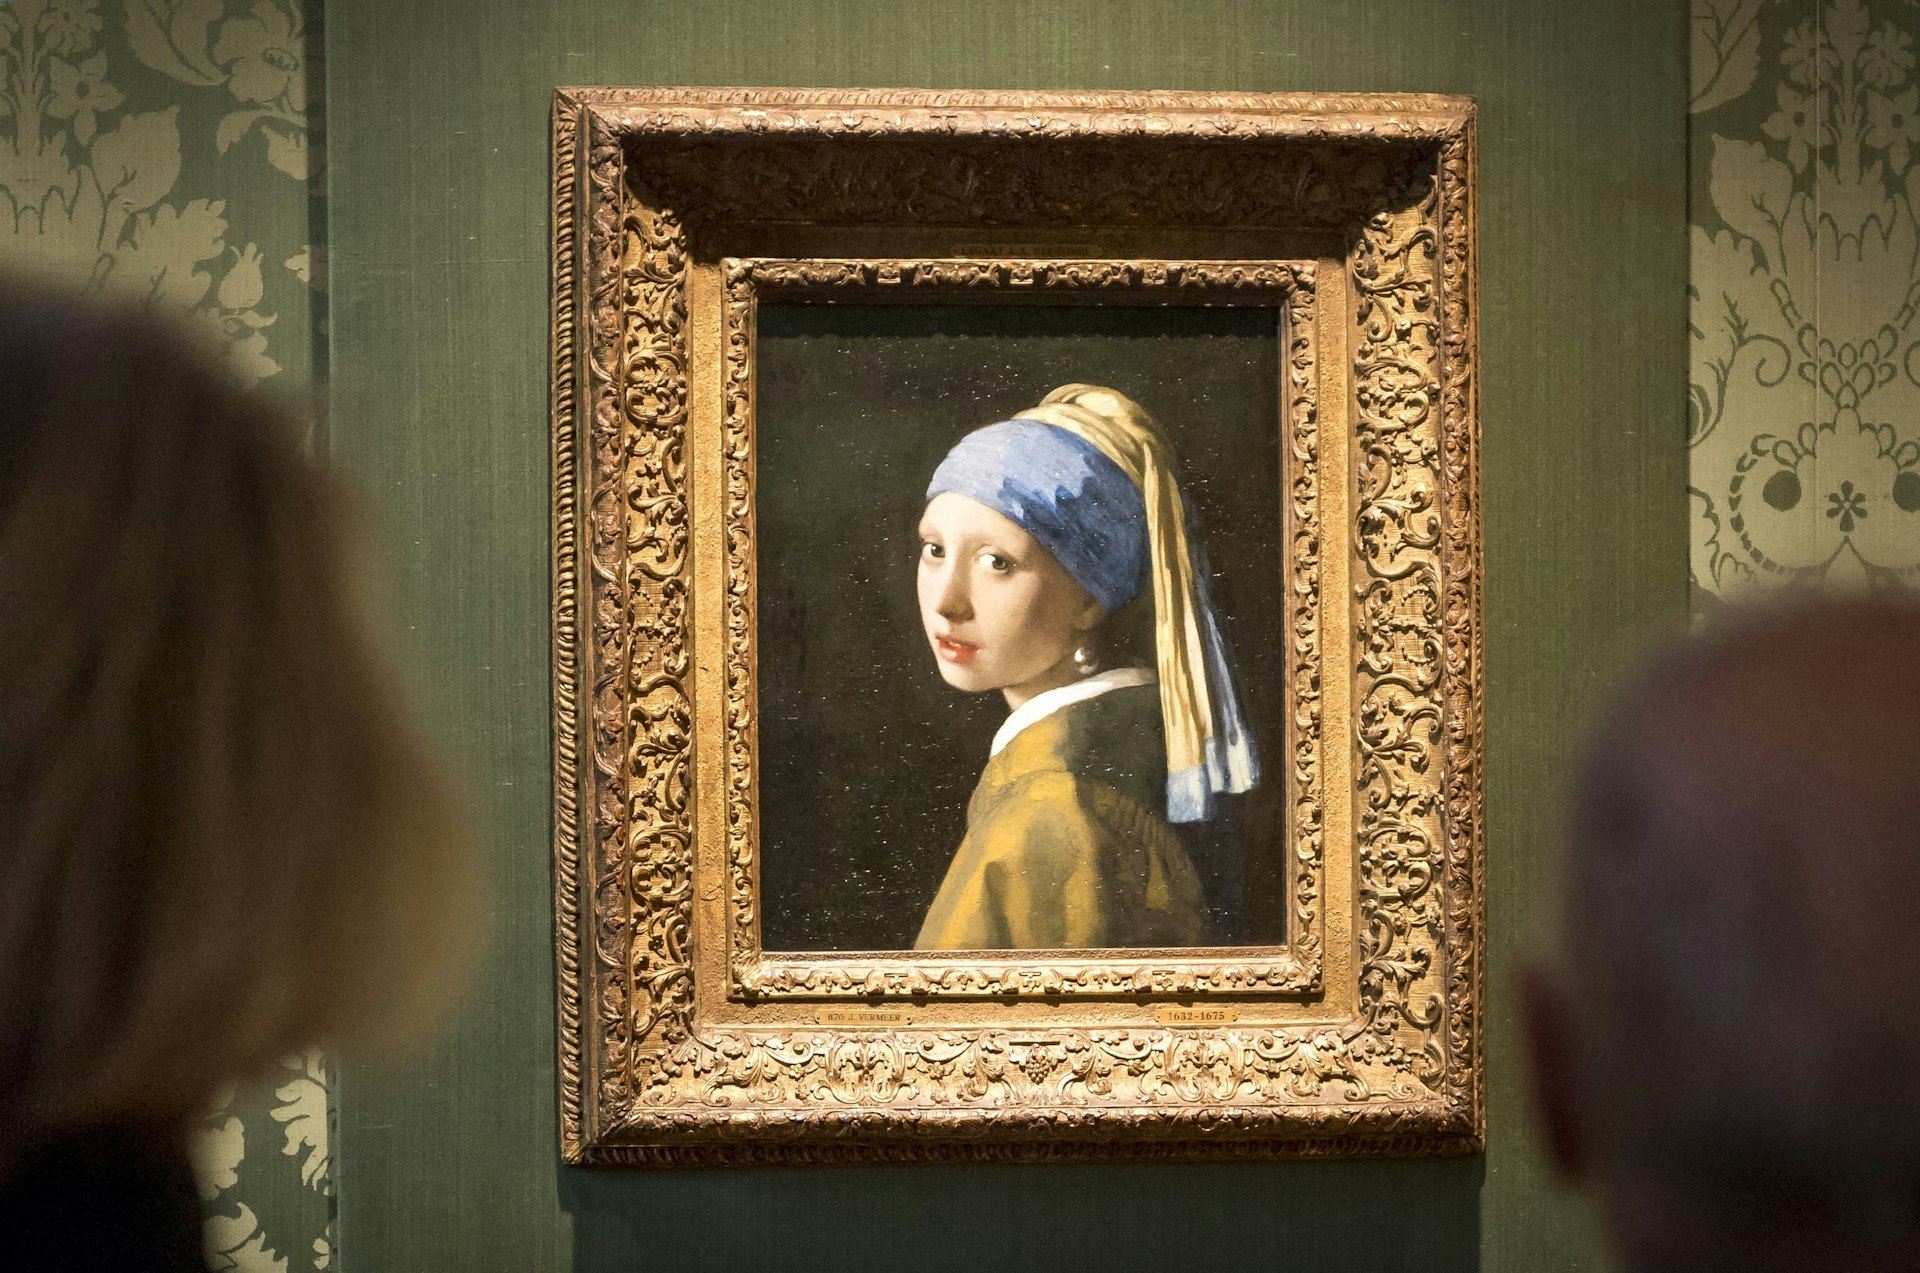 People look at Vermeer’s “Girl with a Pearl Earring” at the Mauritshuis museum, The Hague, Netherlands